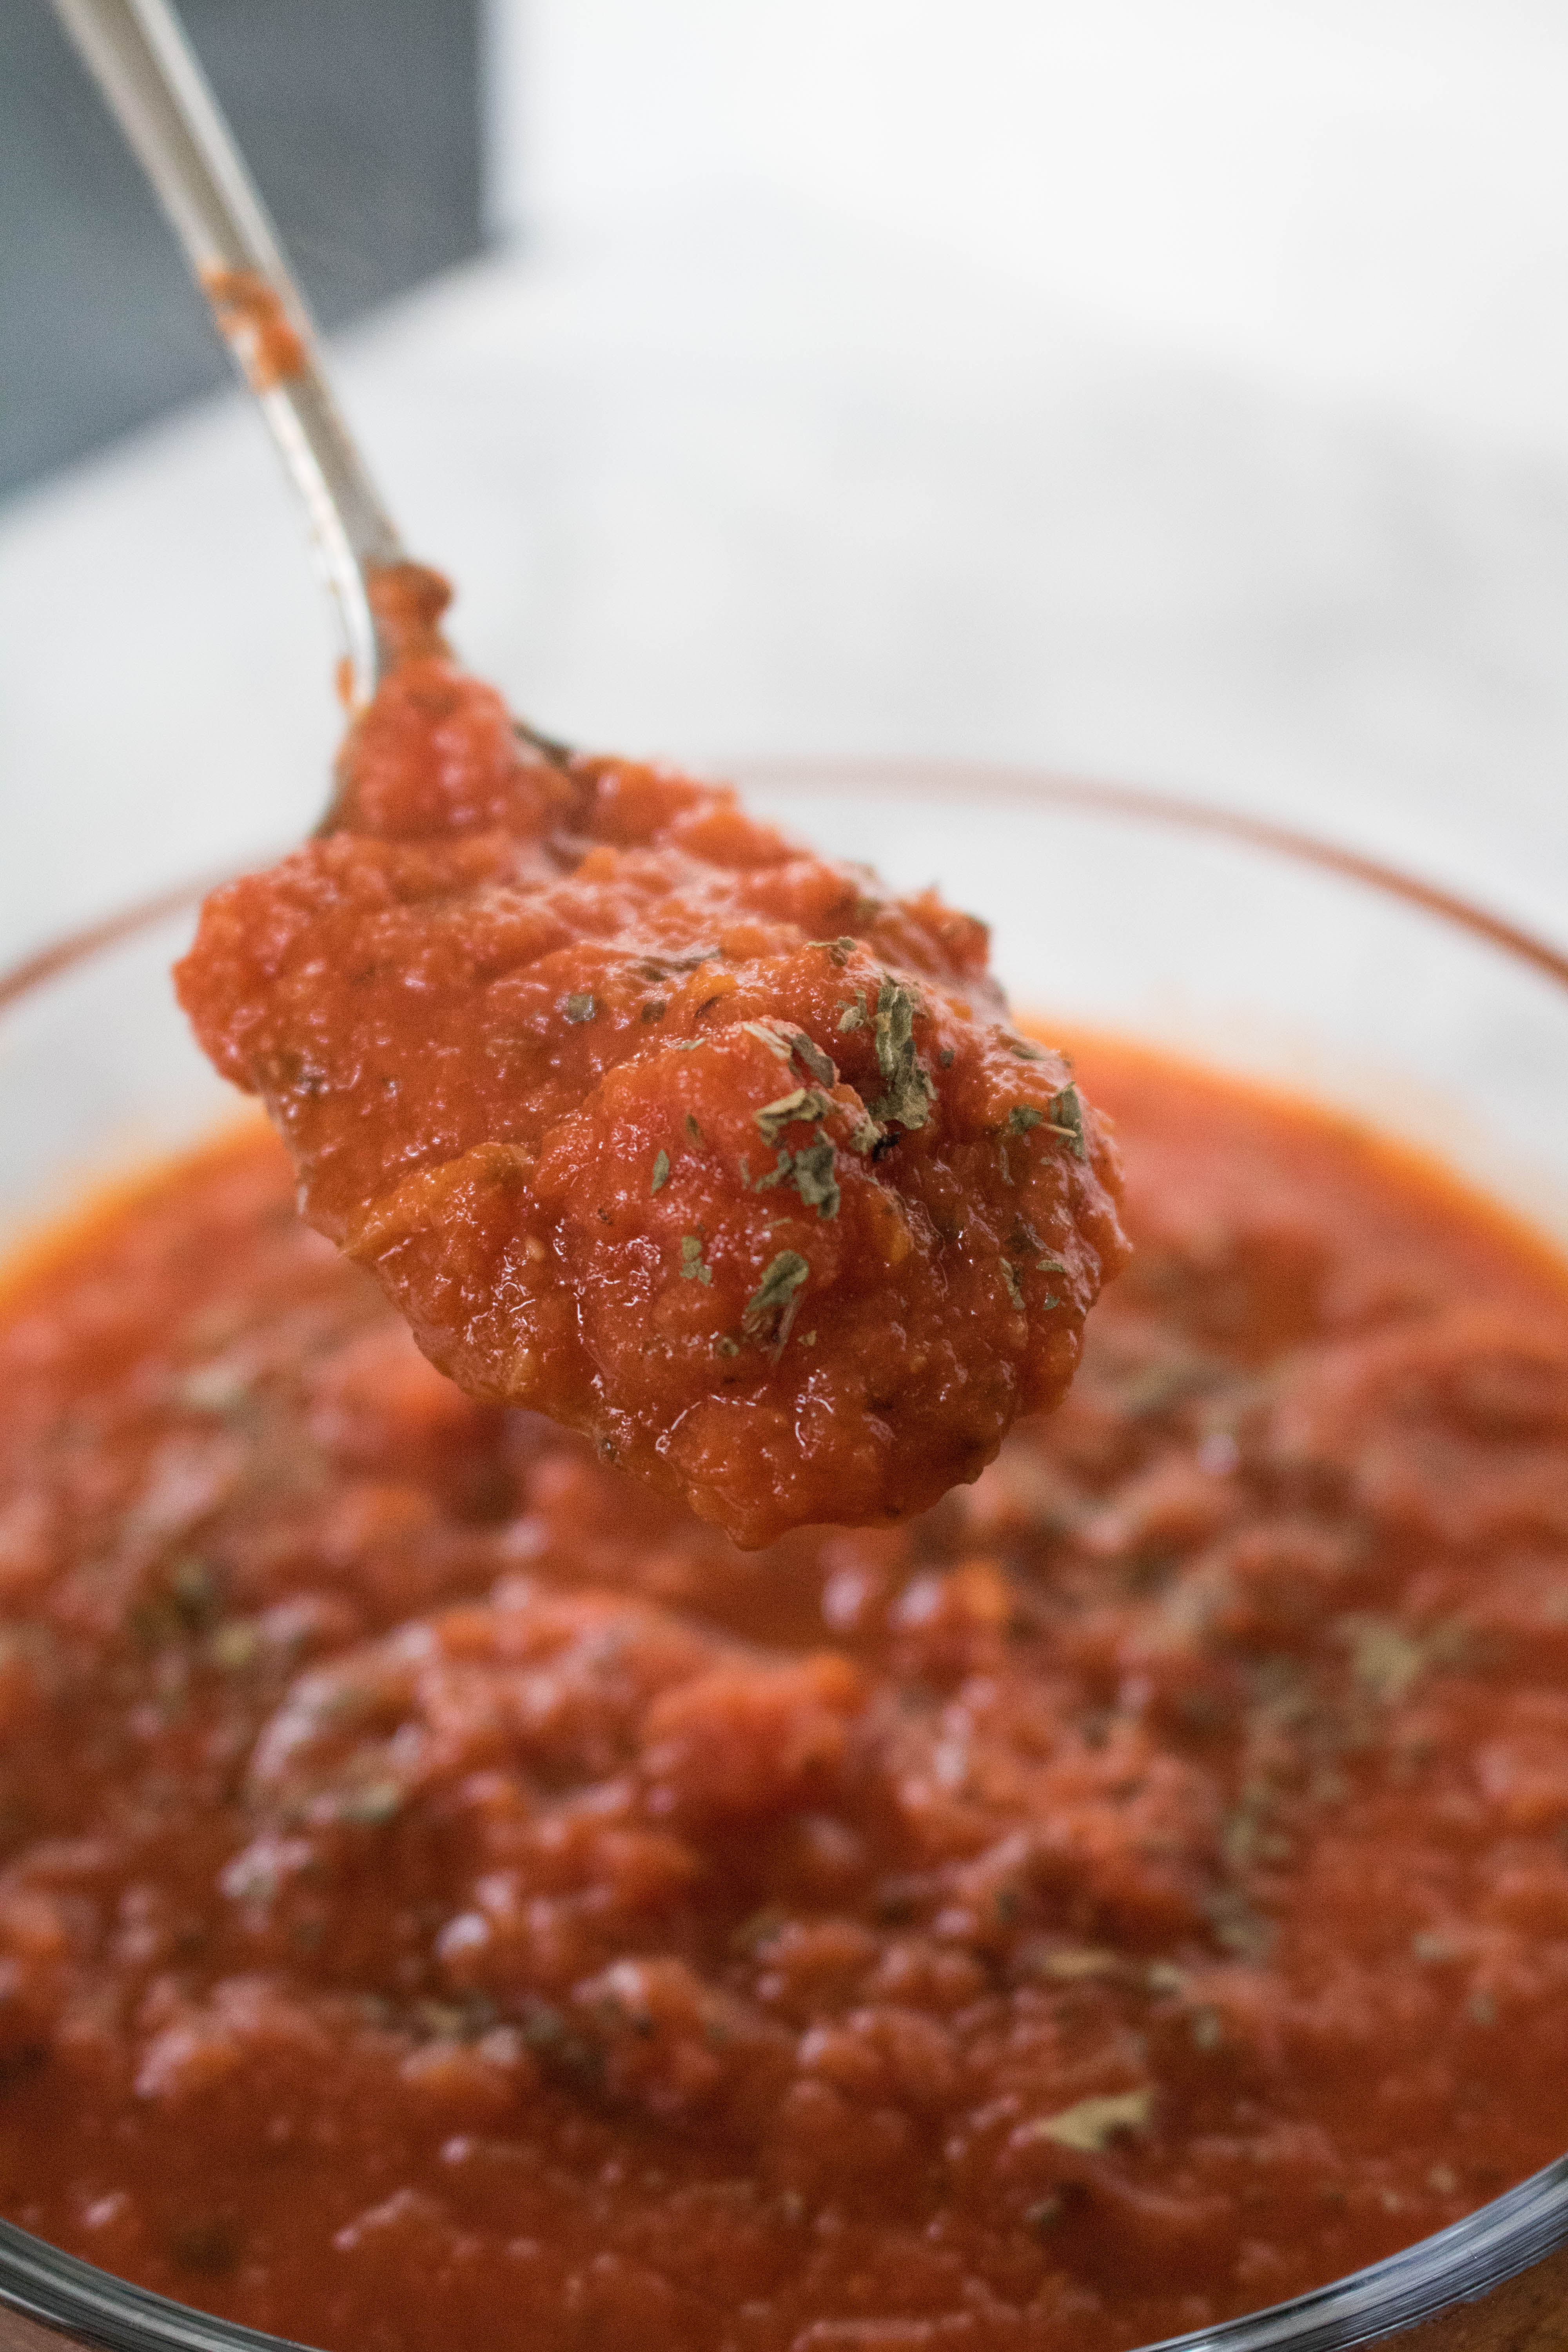 Easiest most delicious marinara sauce with a secret ingredient!